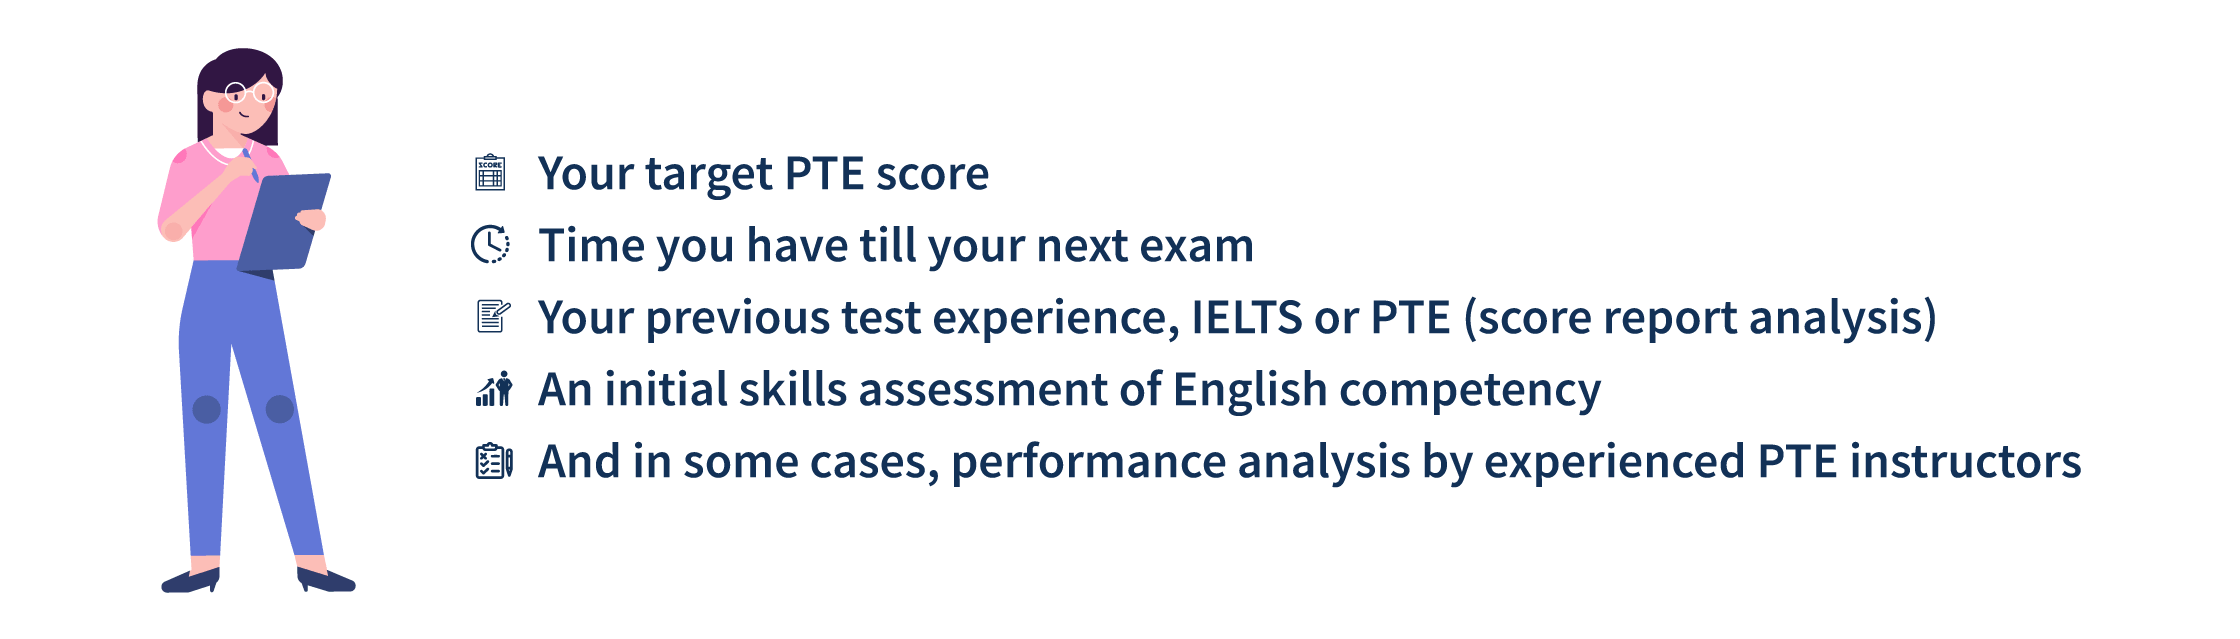 Your target PTE score